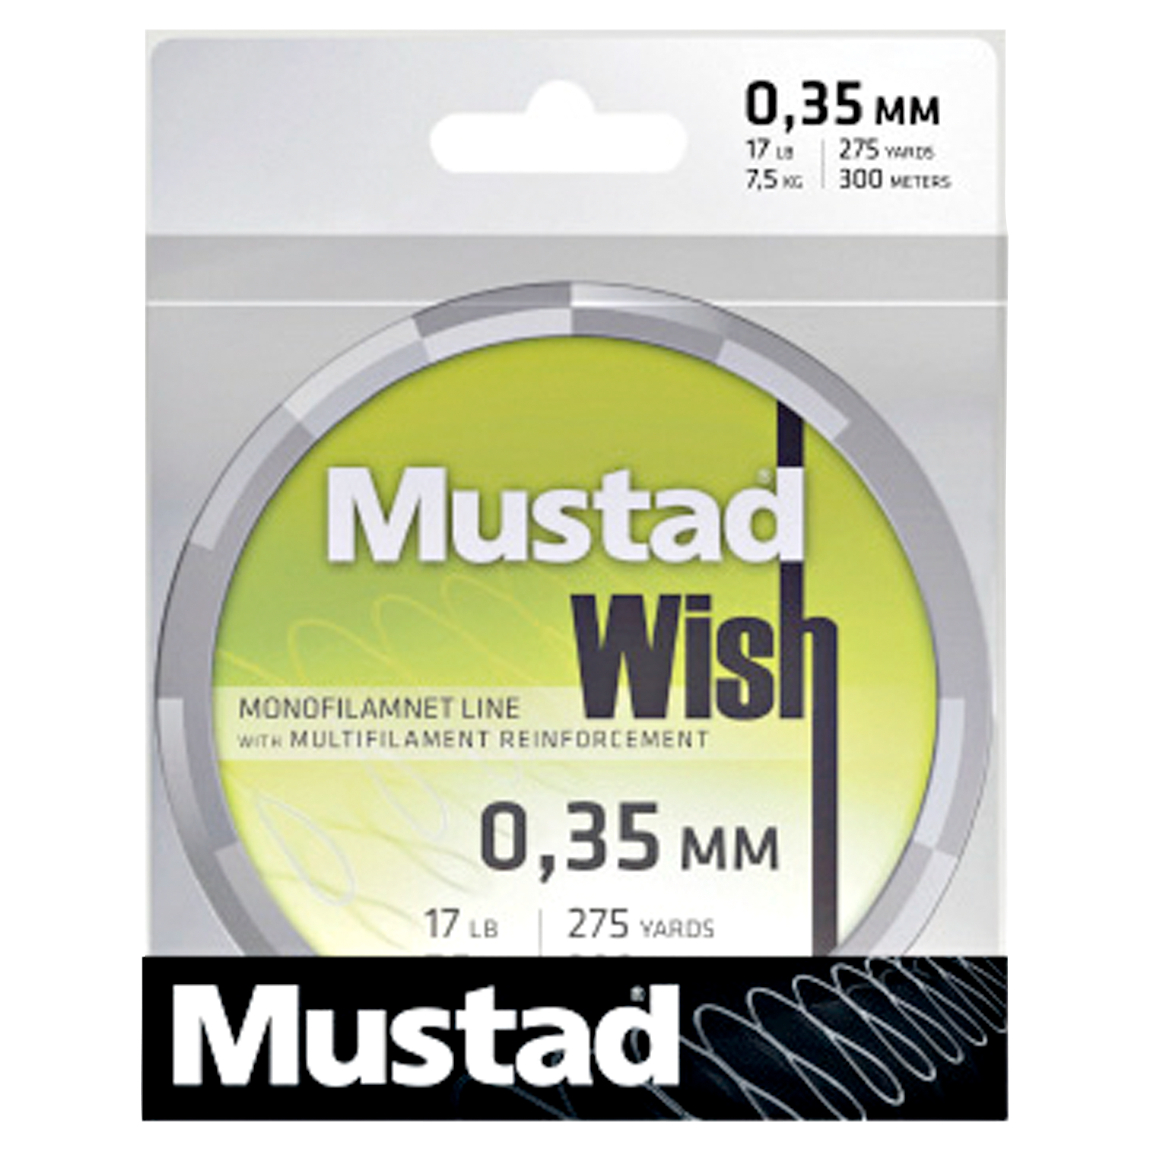 Mustad Fishing Line Wish Braid (chartreuse, 110 m) at low prices